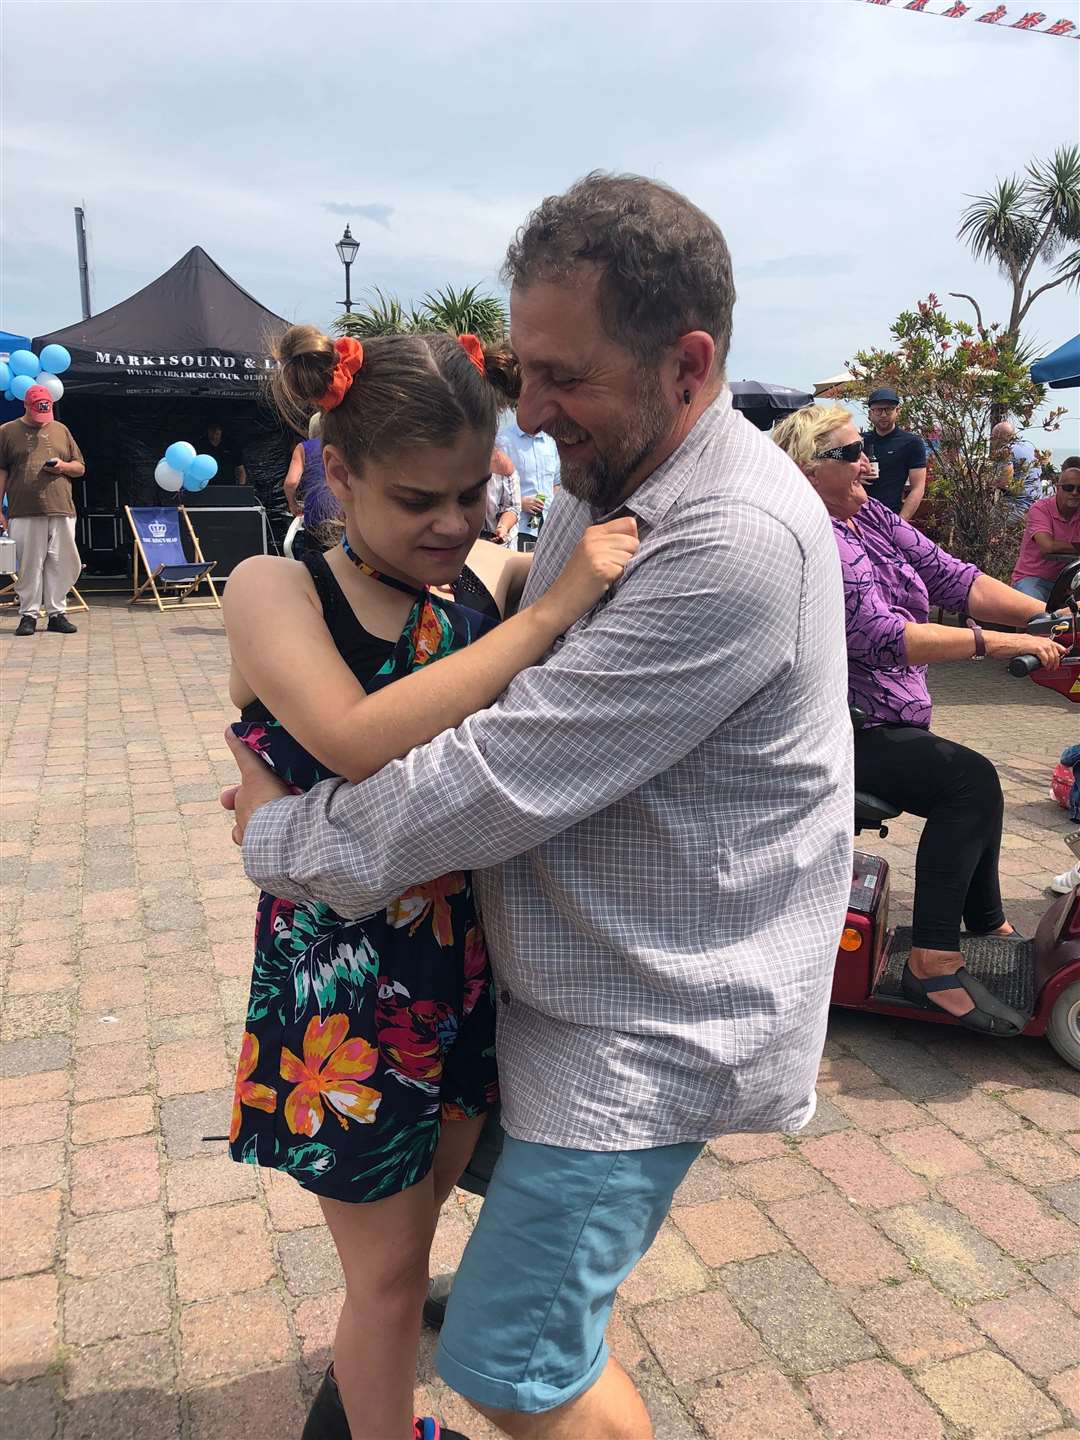 Brett Martin with his daughter Charlotte dancing together at a charity fundraiser in August 2019